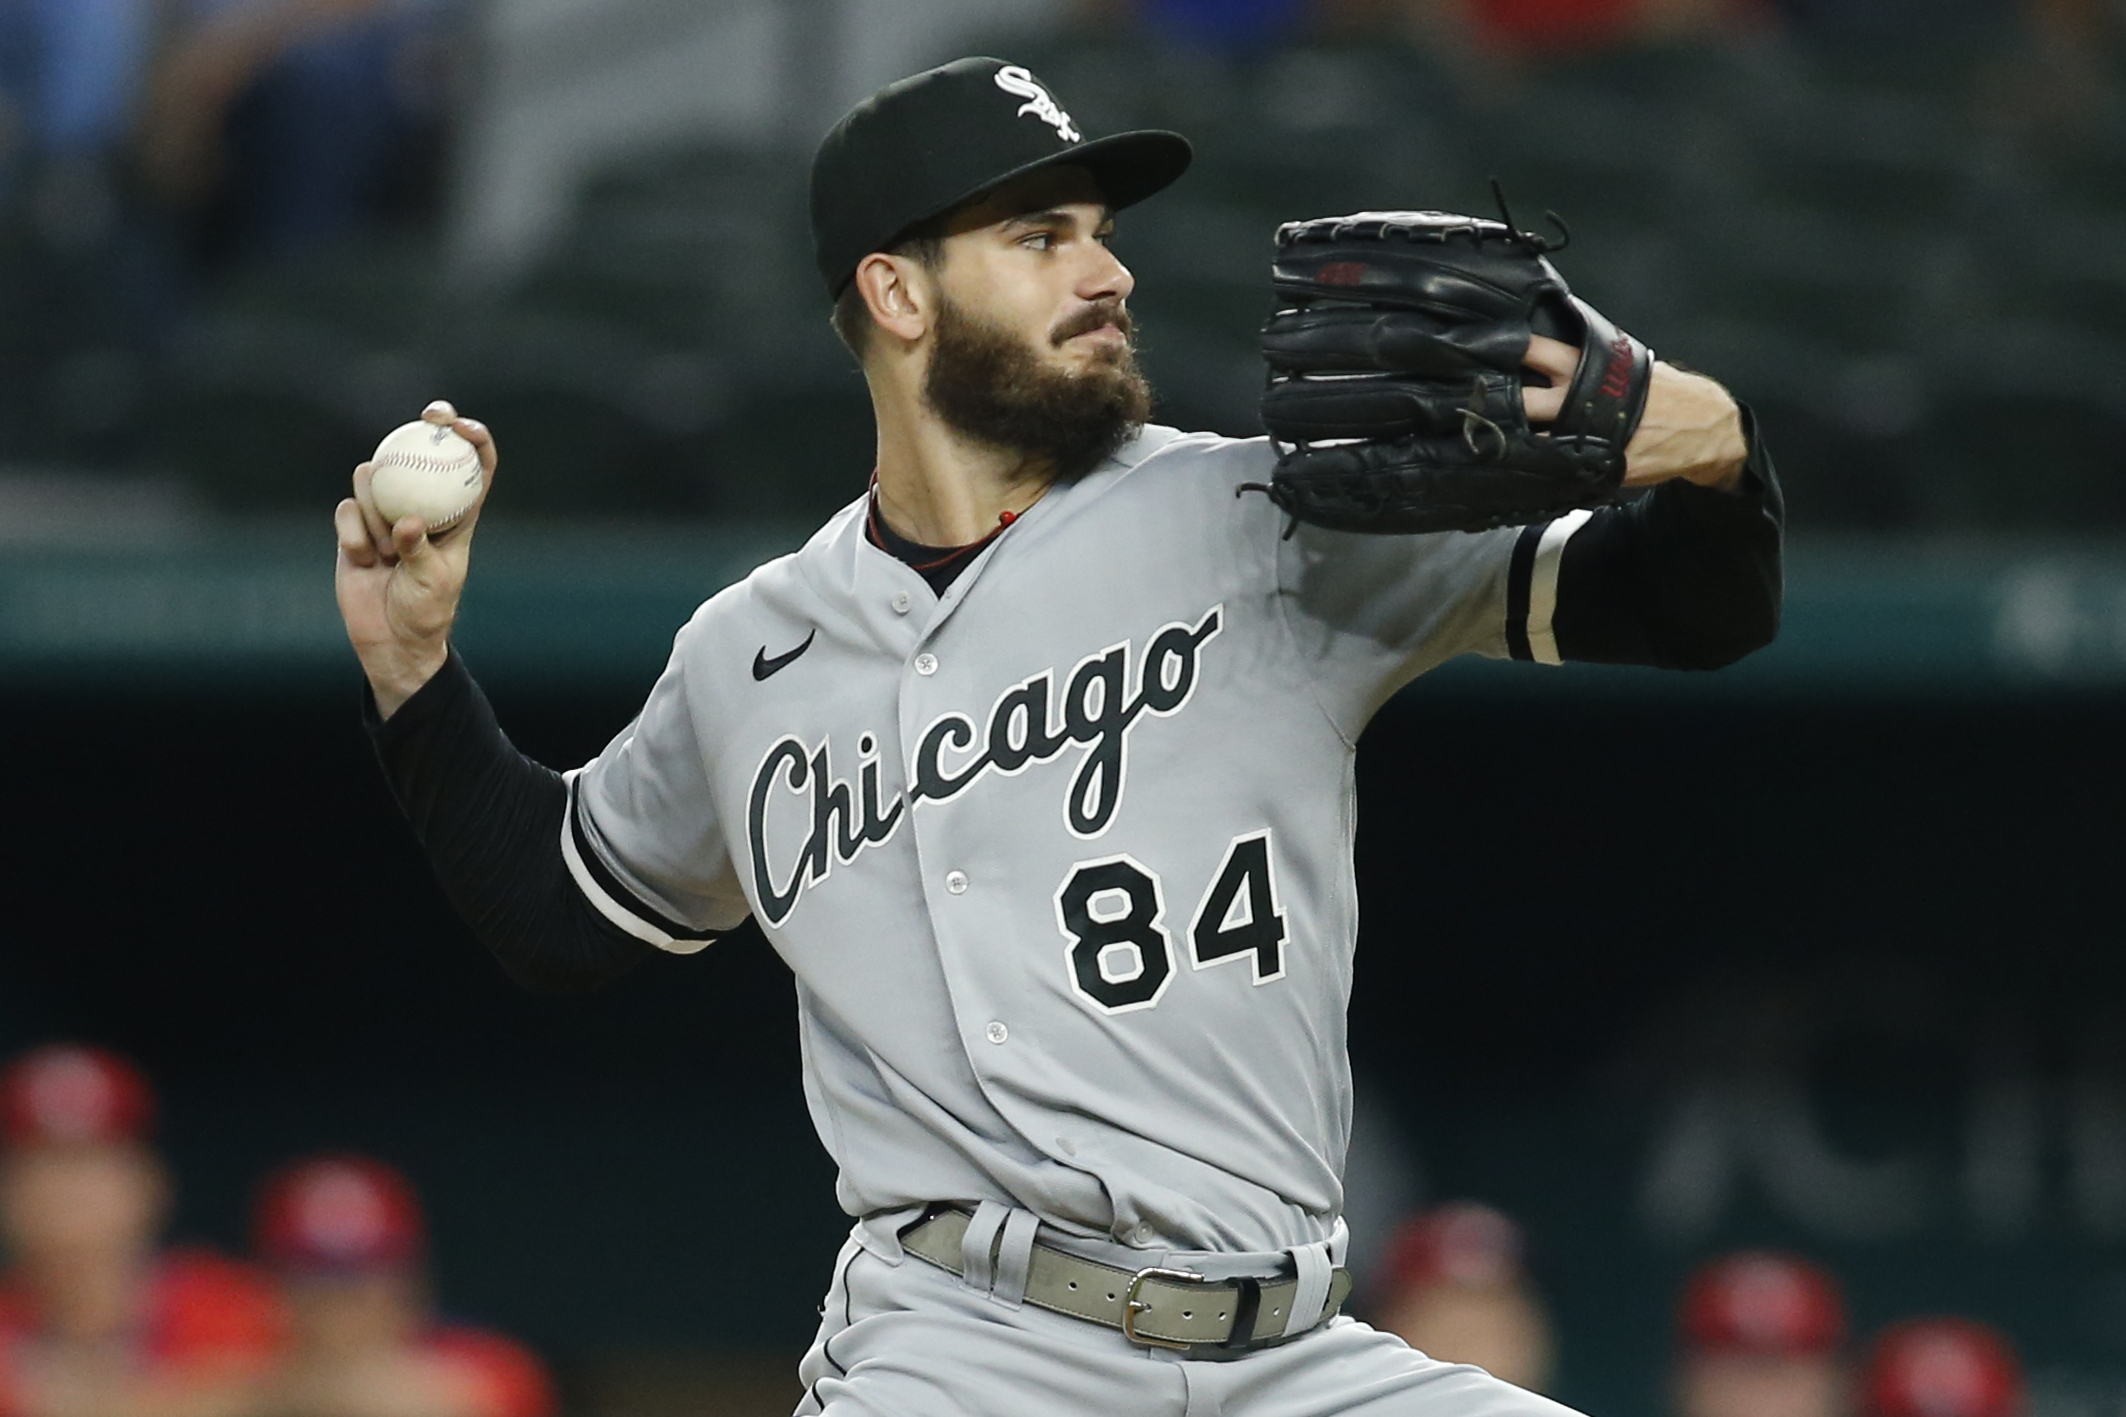 Sep 17, 2021; Arlington, Texas, USA; Chicago White Sox starting pitcher Dylan Cease (84) throws a pitch in the first inning against the Texas Rangers at Globe Life Field.